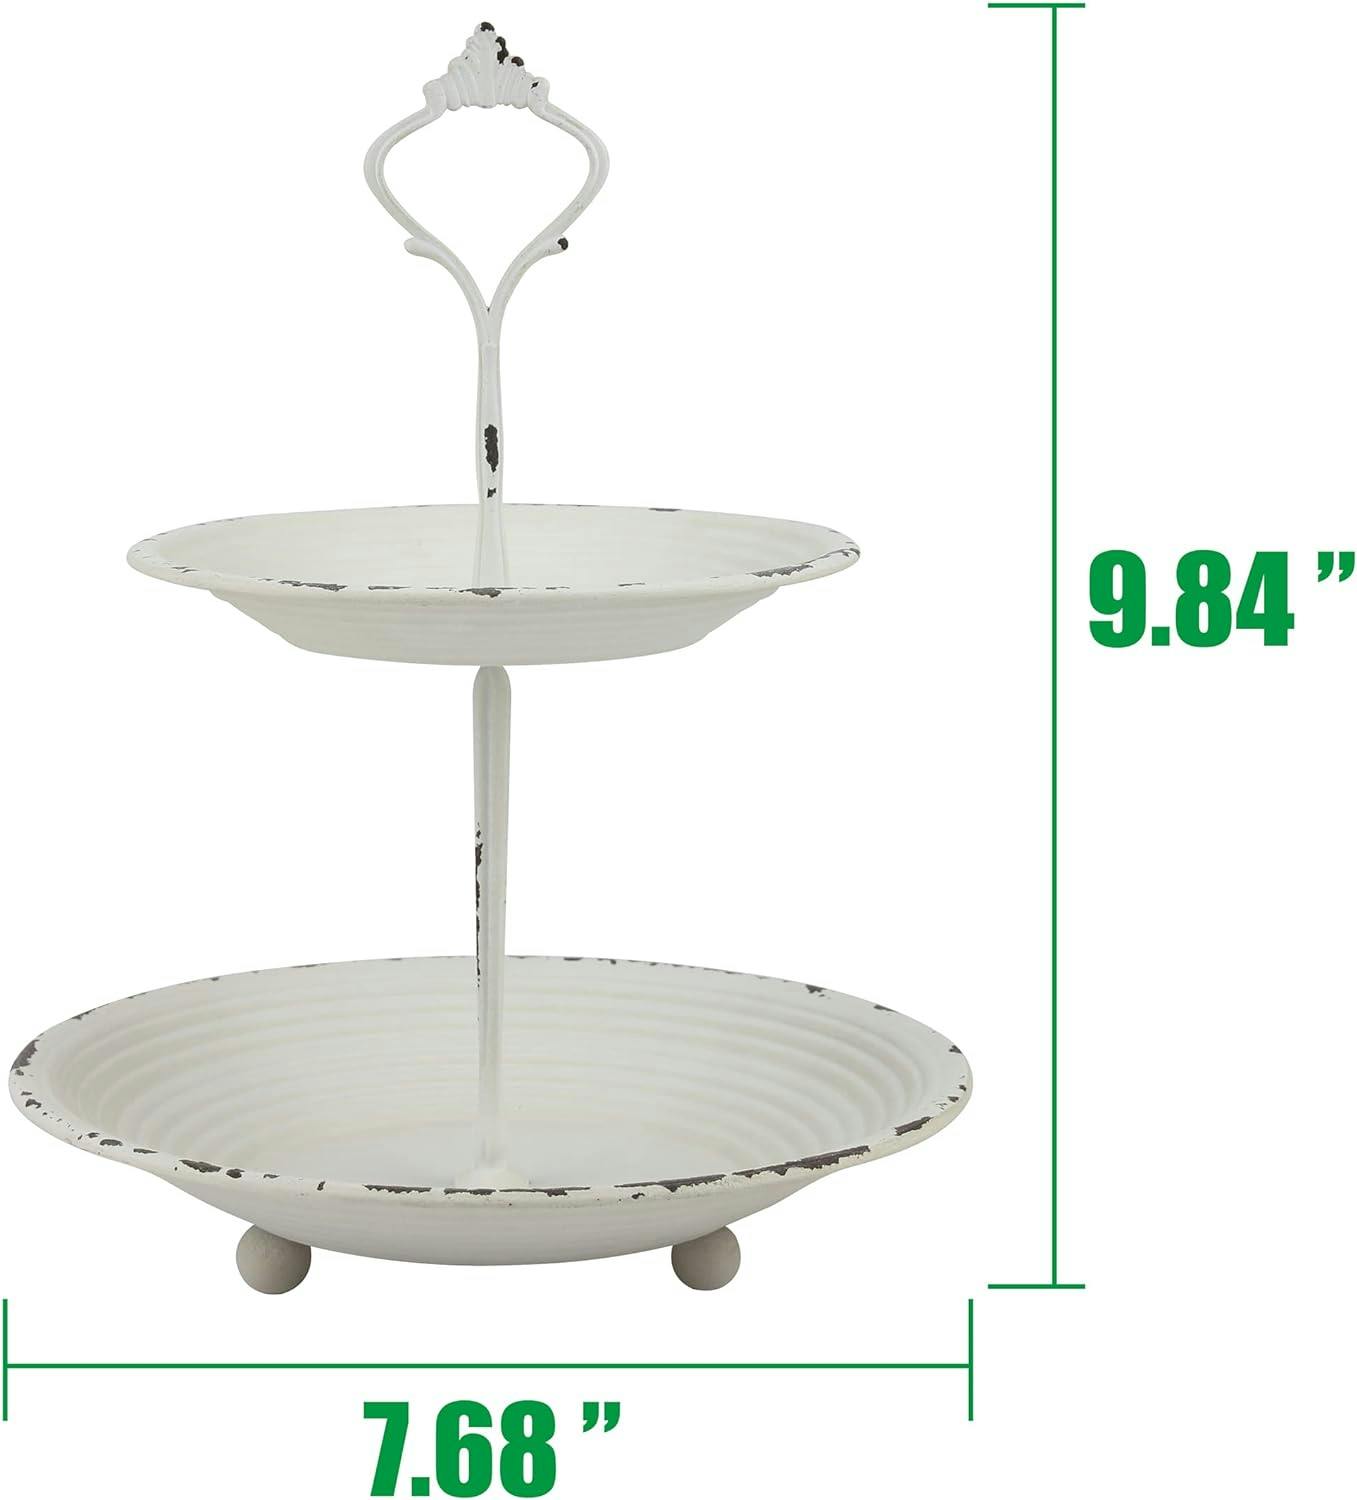 French Country Round Metal 2-Tier Trinket Tray in Off-White